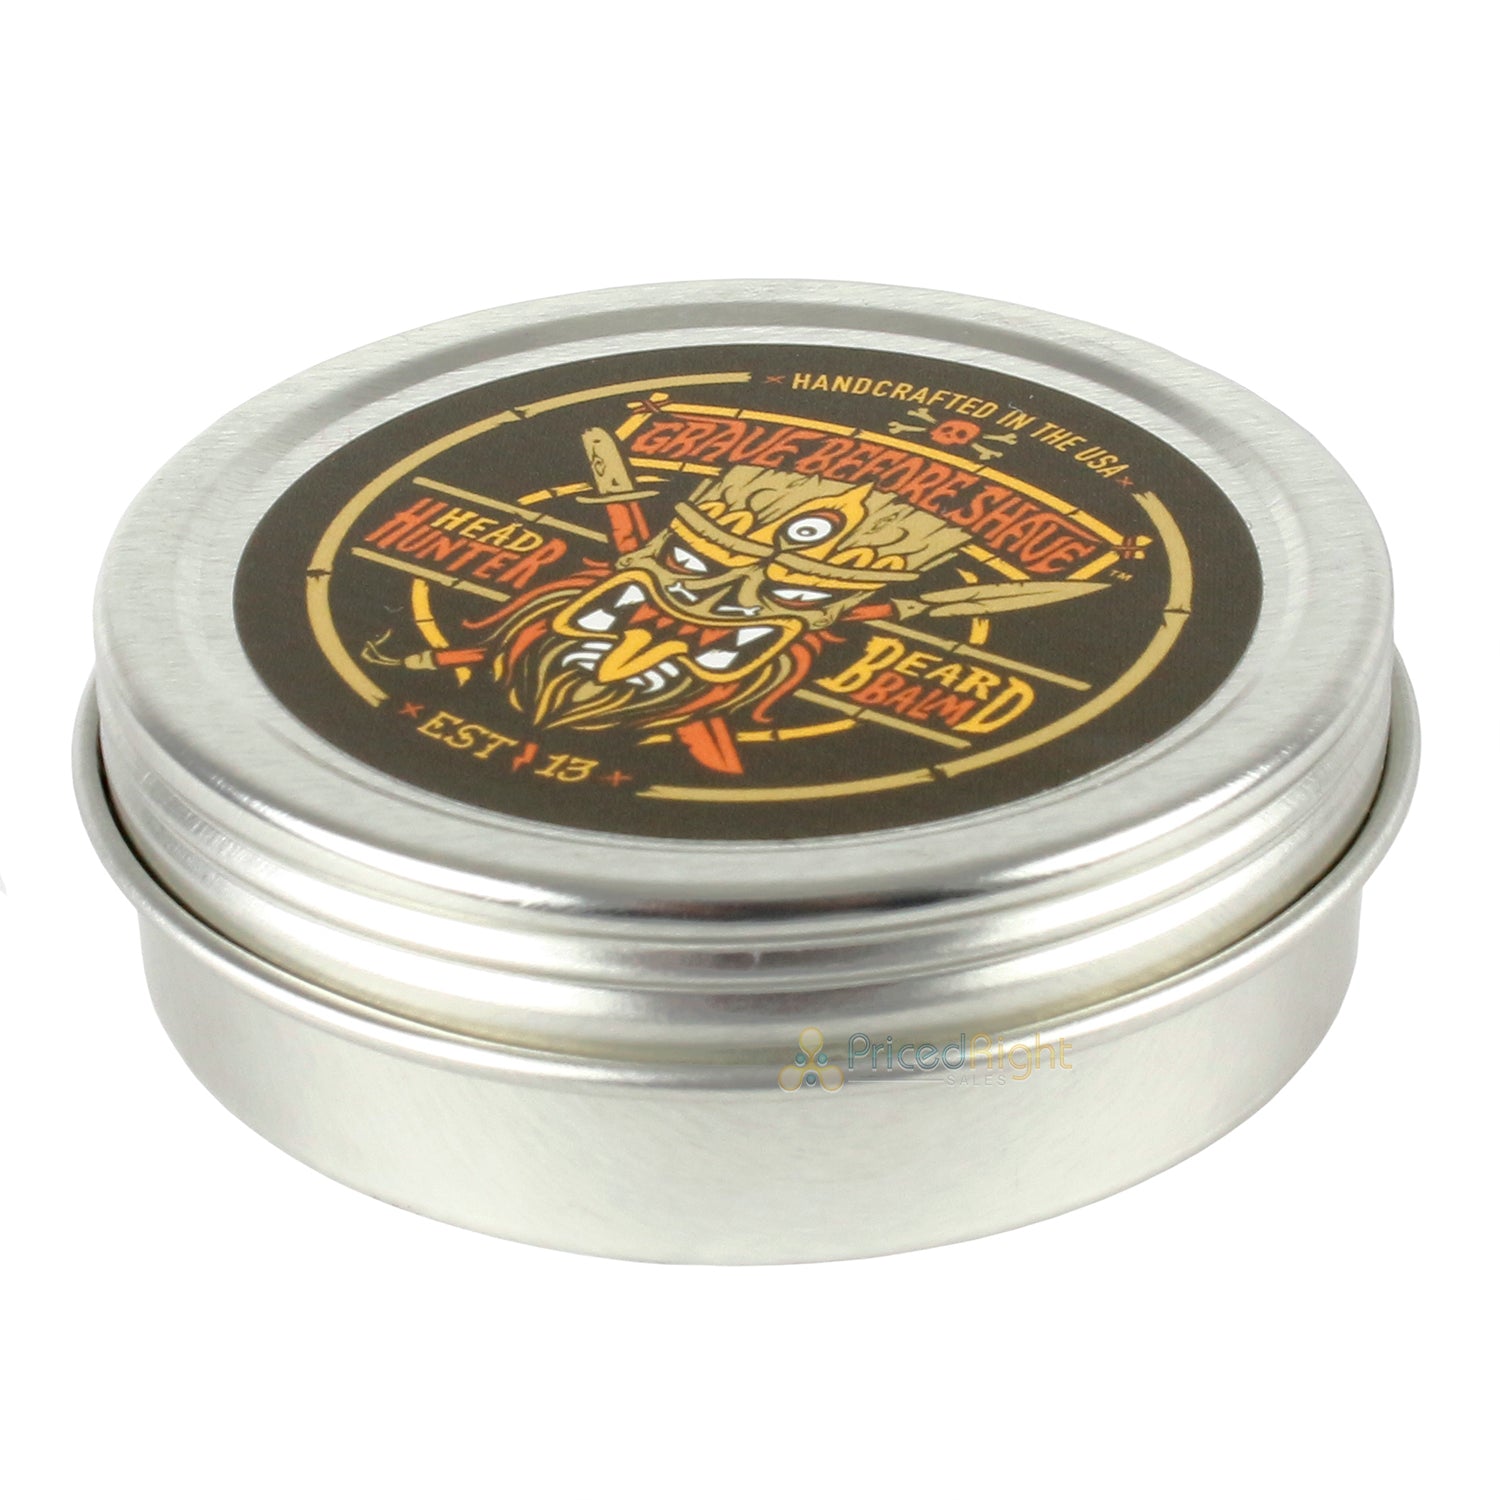 Grave Before Shave Handcrafted Beard Balm Head Hunter Blend Tropical Summer 2 Oz